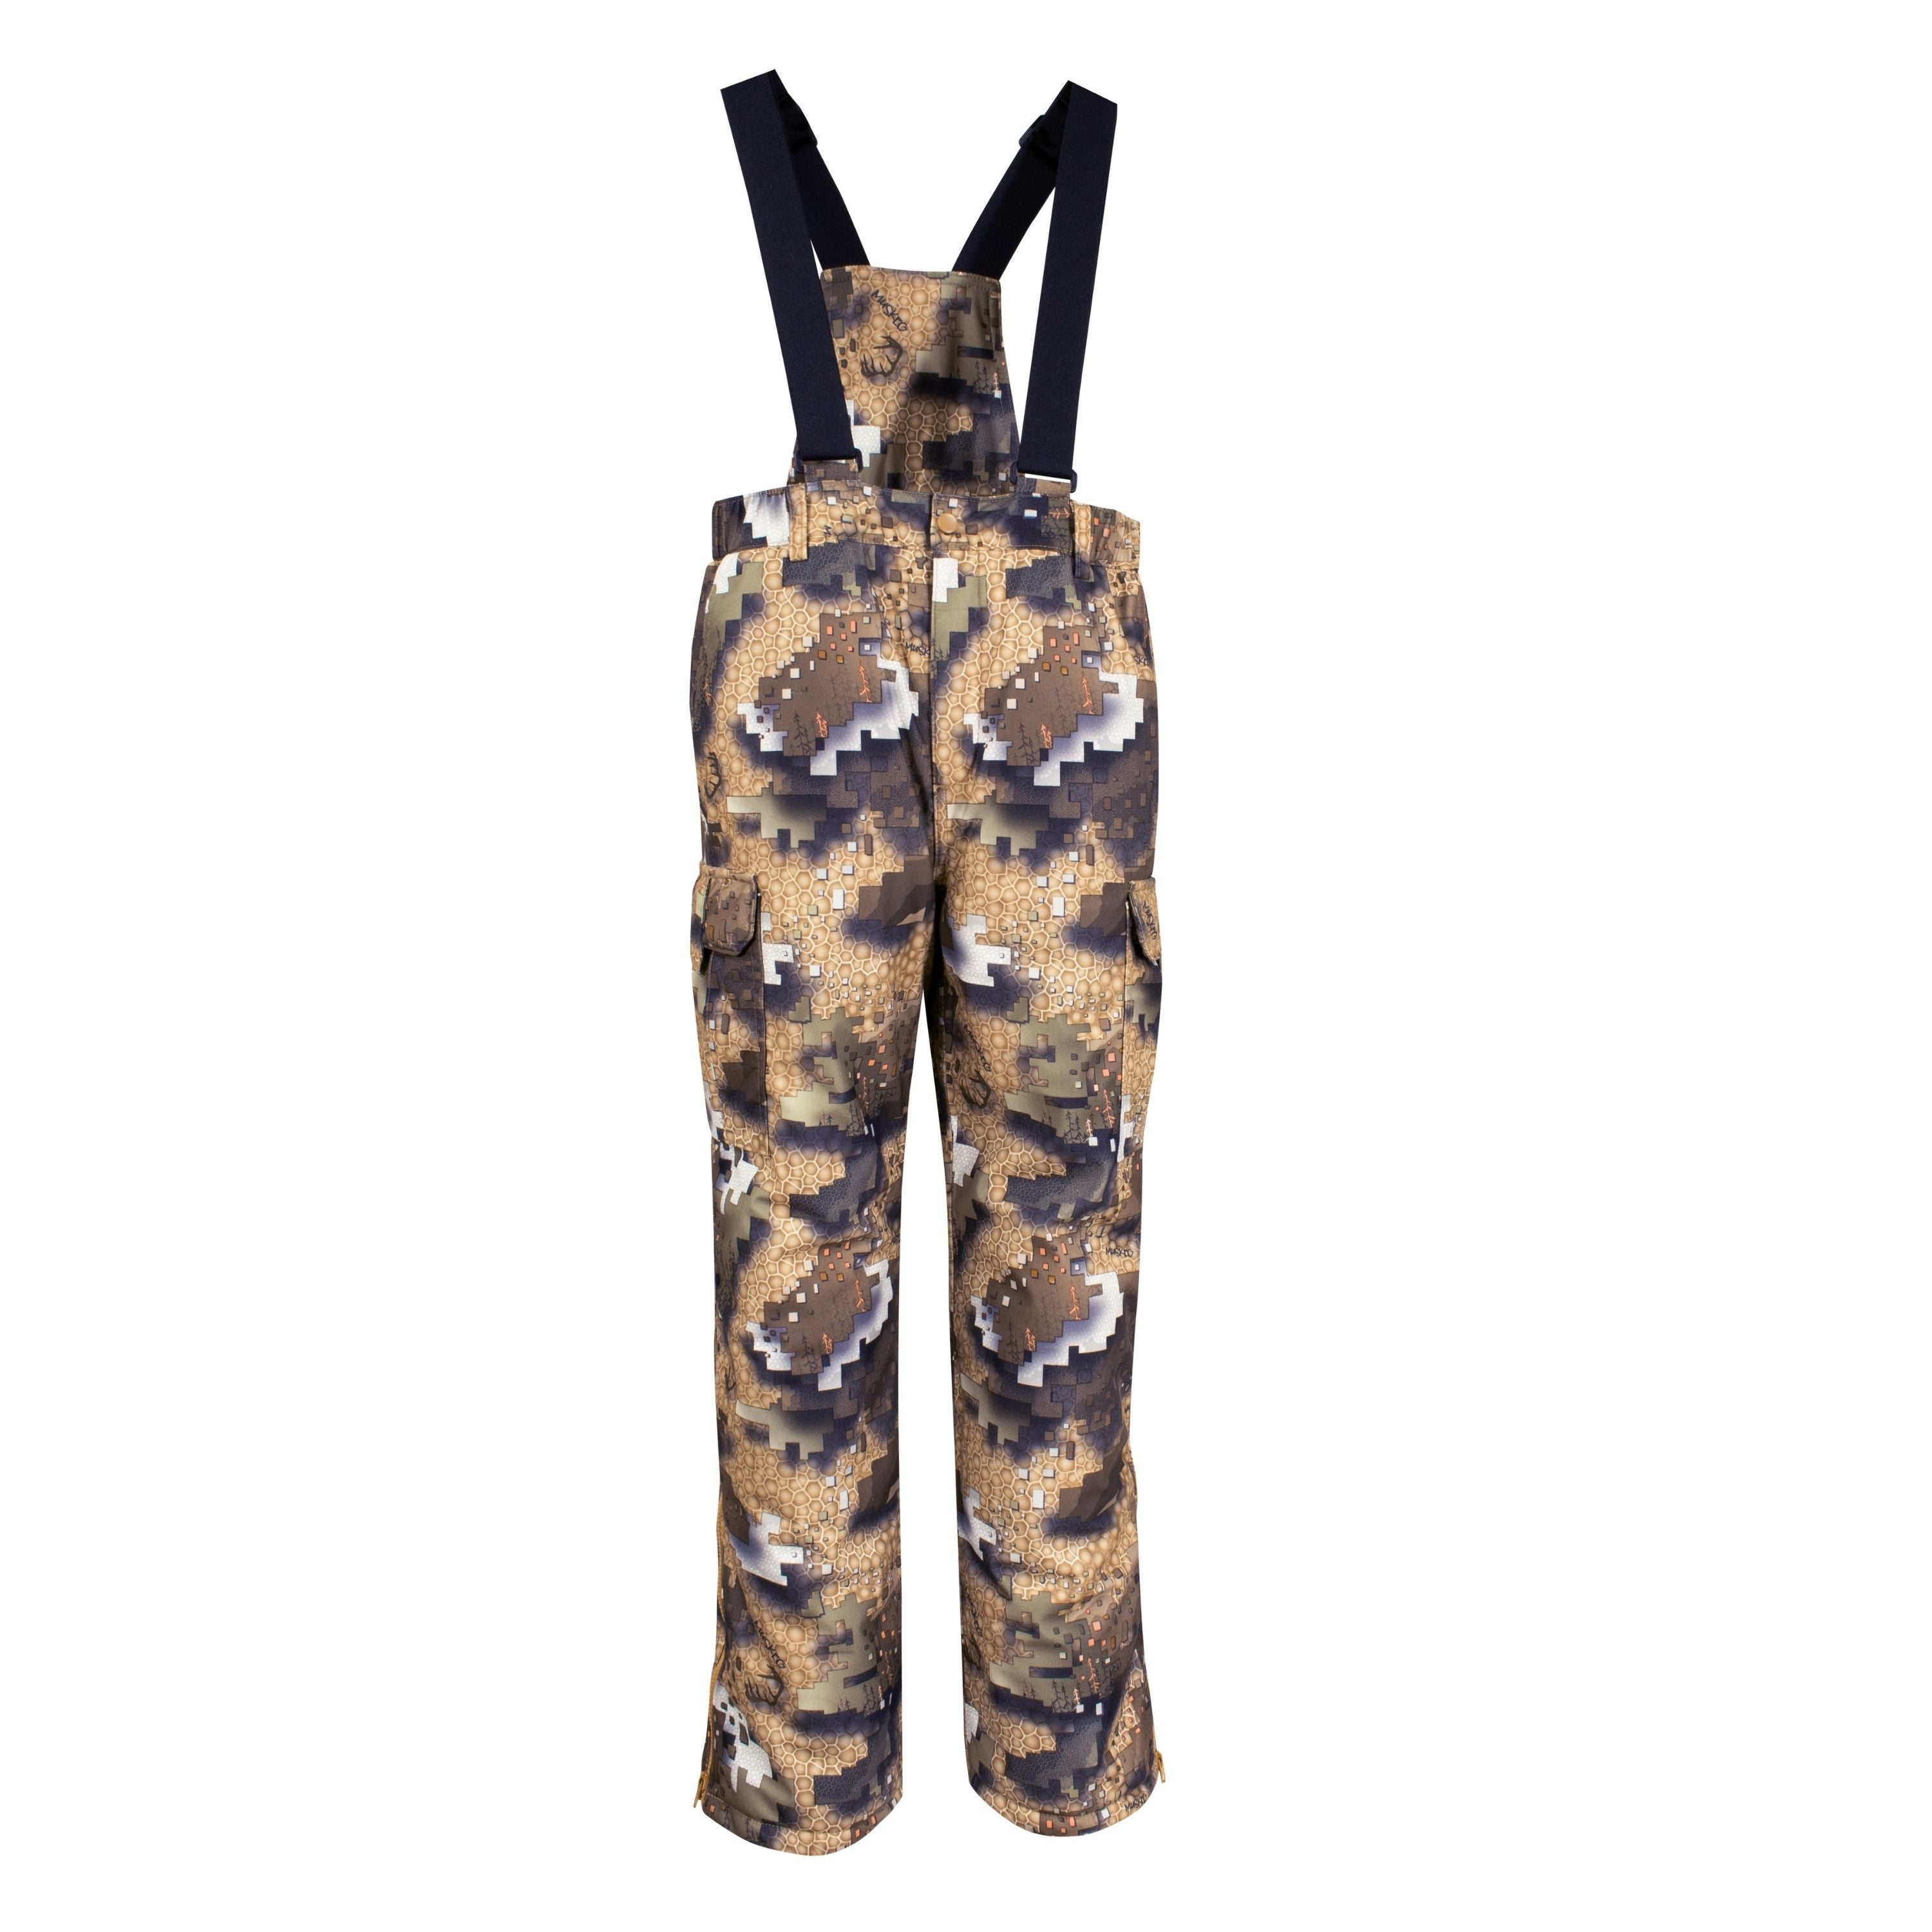 "Muskeg" Hunting overalls - Youth's